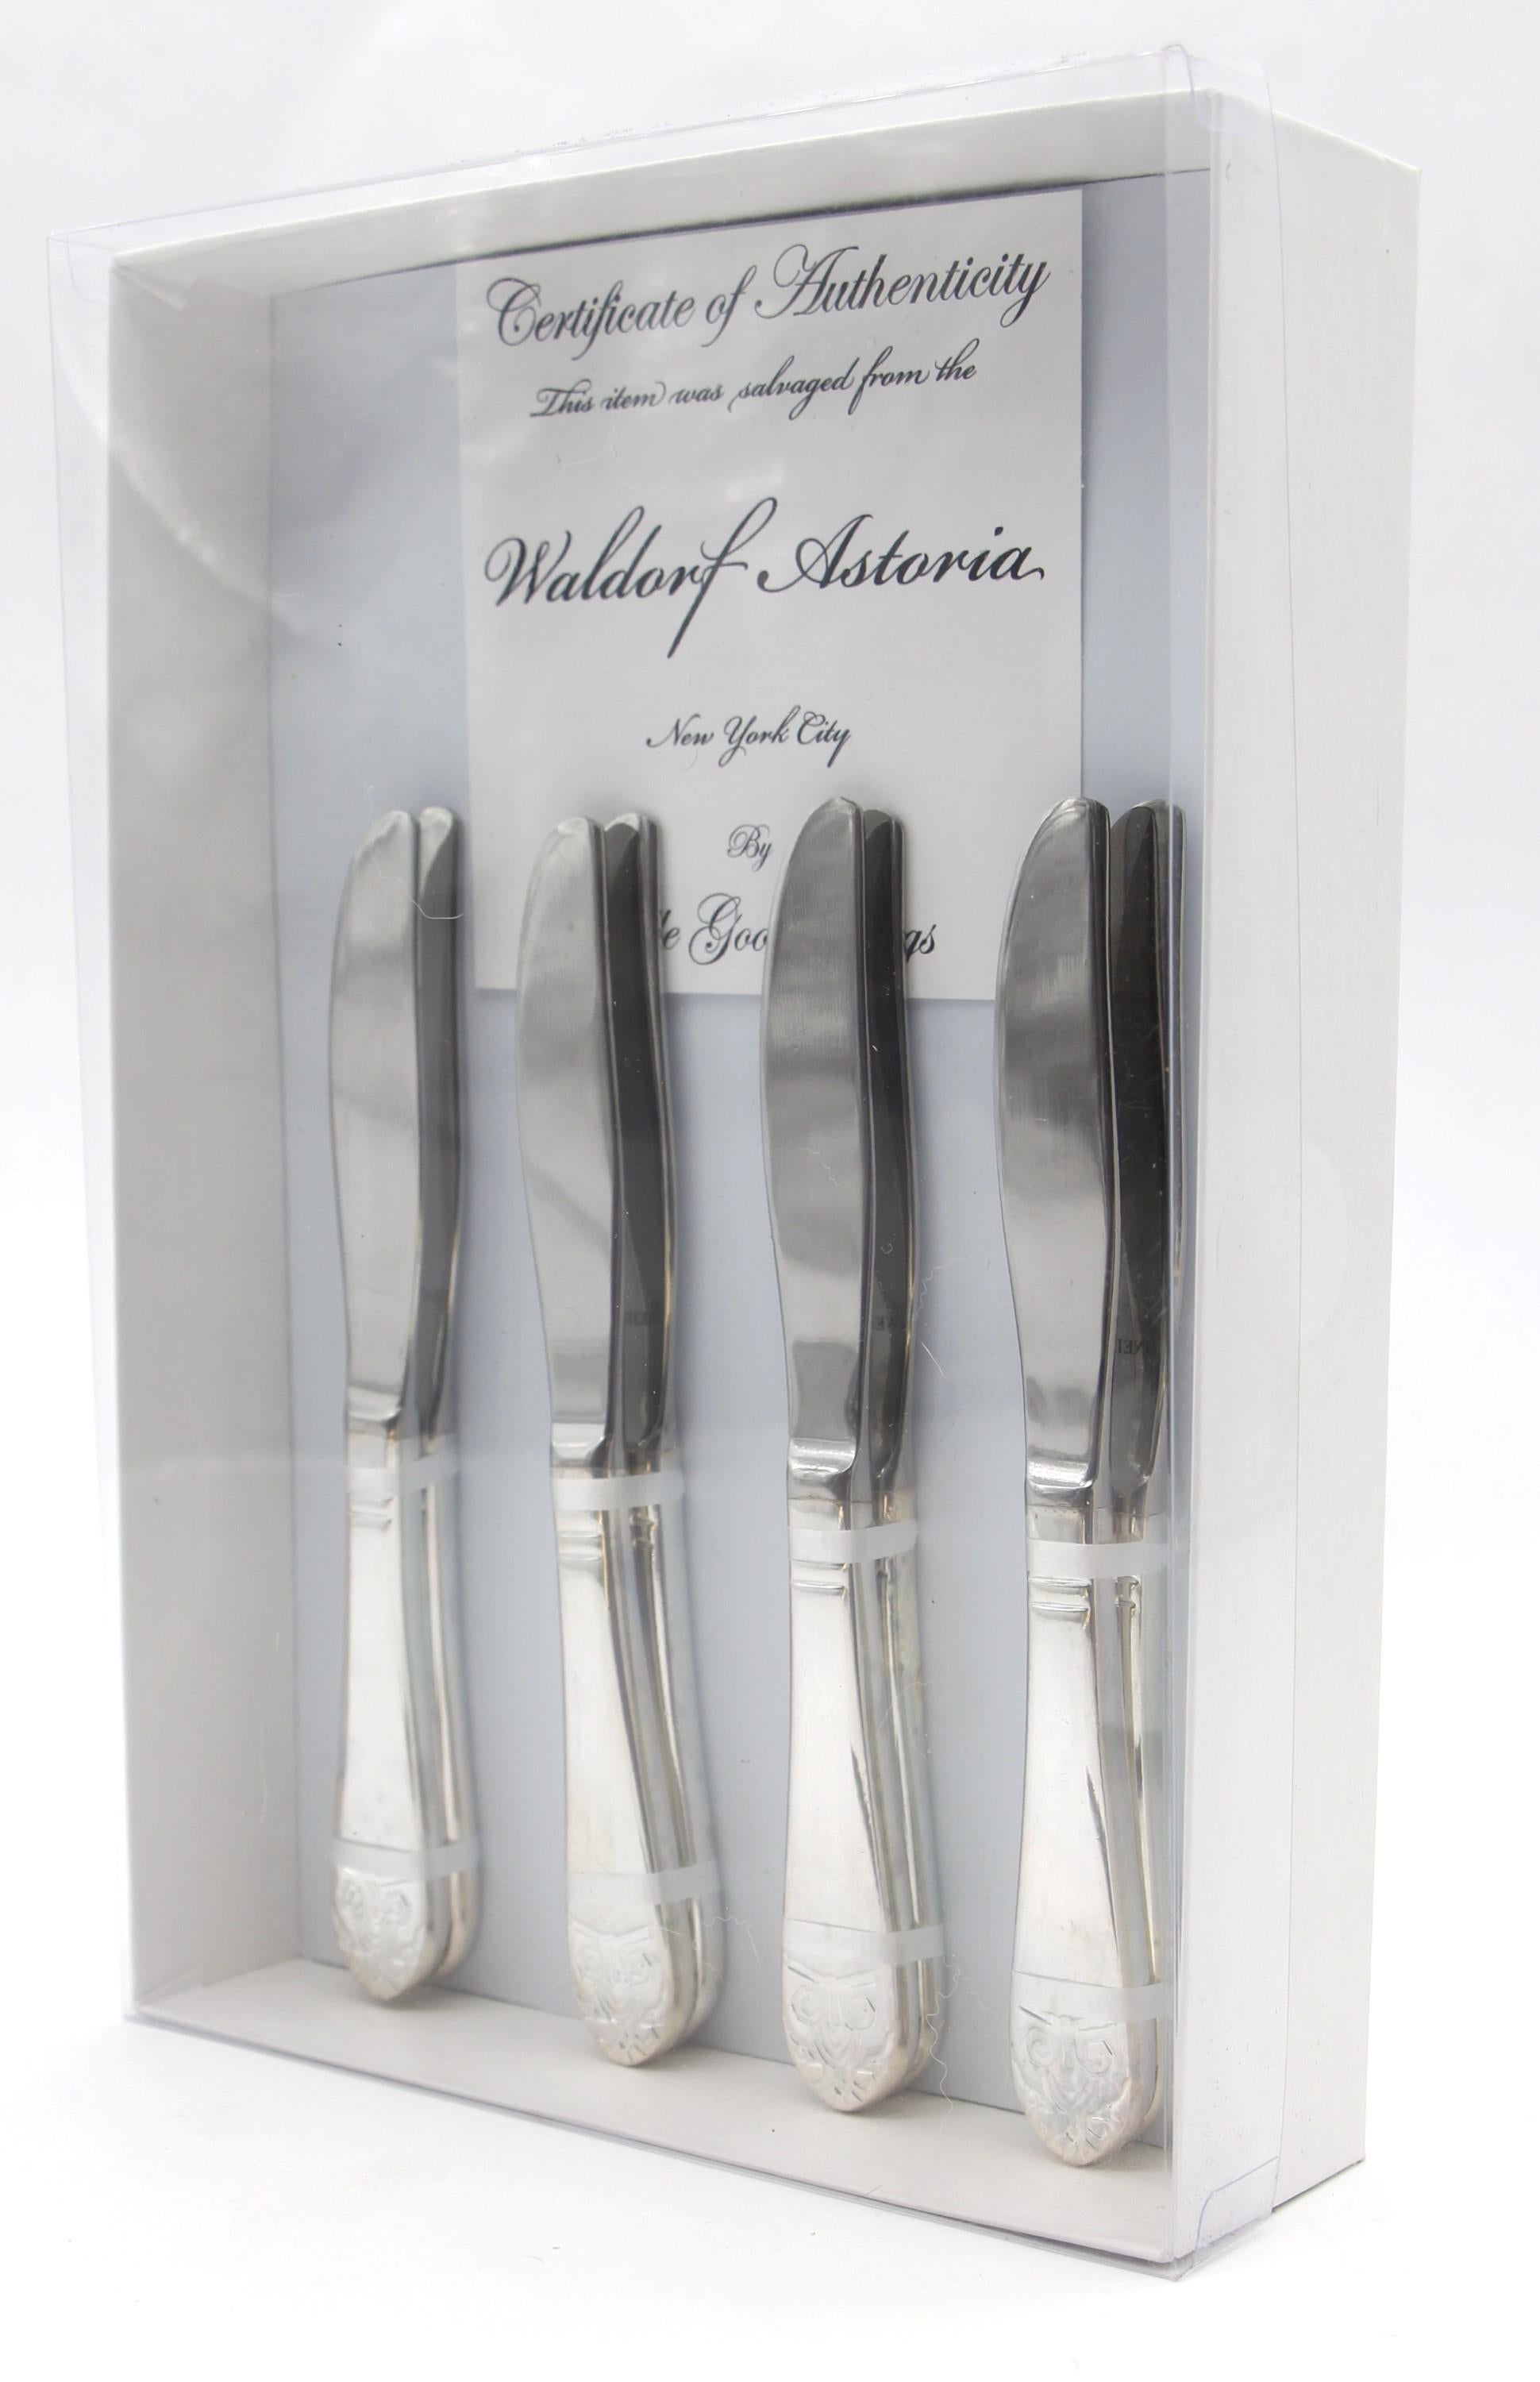 New, never used silver plated steel 8 piece butter knife set. Made by Oneida. These pieces were back stock in the Waldorf Astoria Hotel on Park Ave in New York City. All pieces are stamped Waldorf Astoria. This set includes a Waldorf Astoria